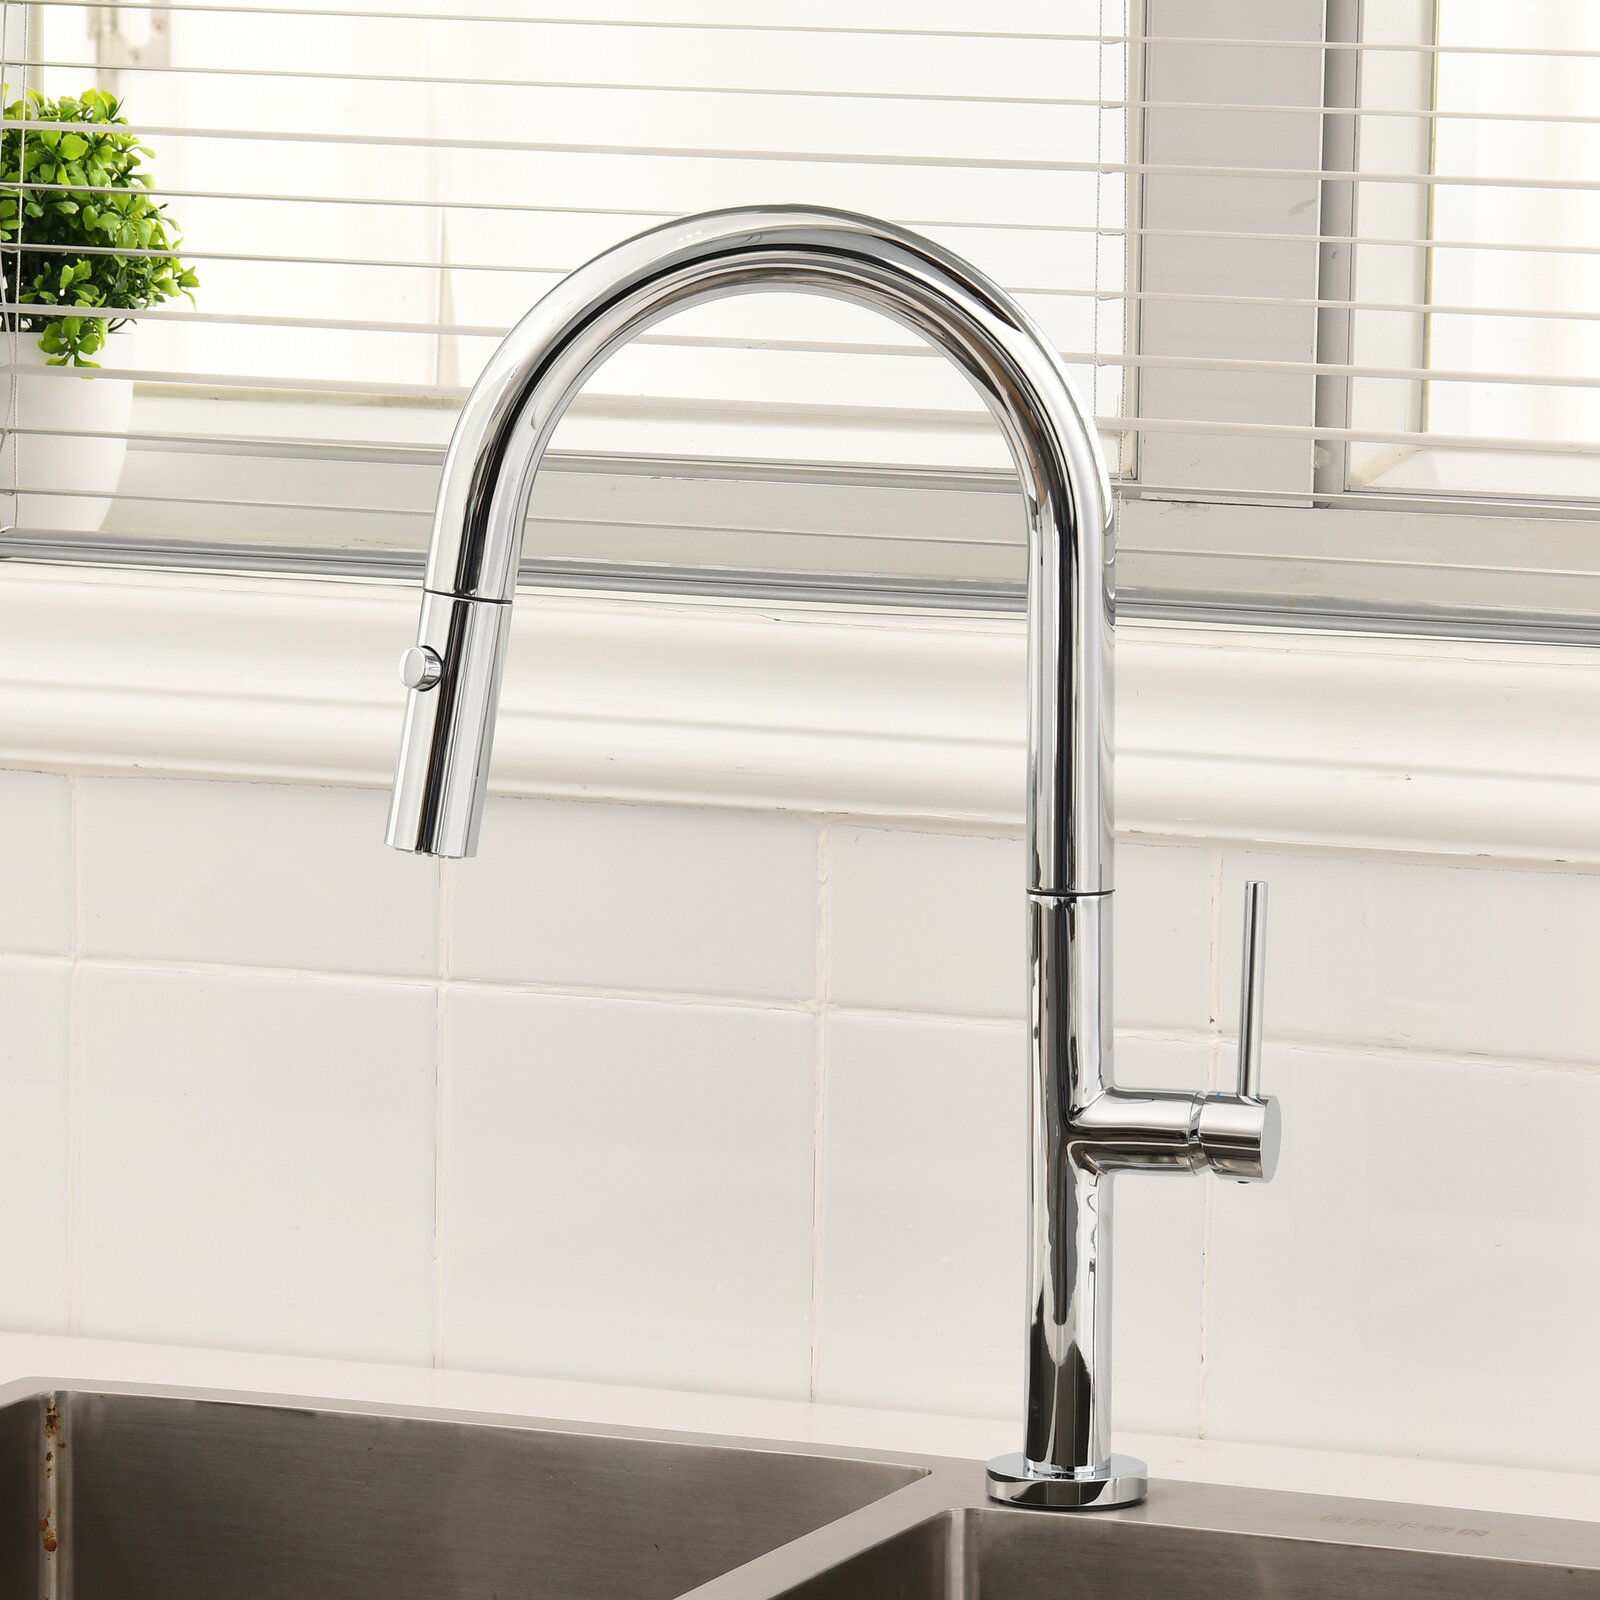 Aquacubic Modern cUPC NSF Chrome Finish dual function Kitchen Sink Faucet with Pull Down Sprayer AF6842-5